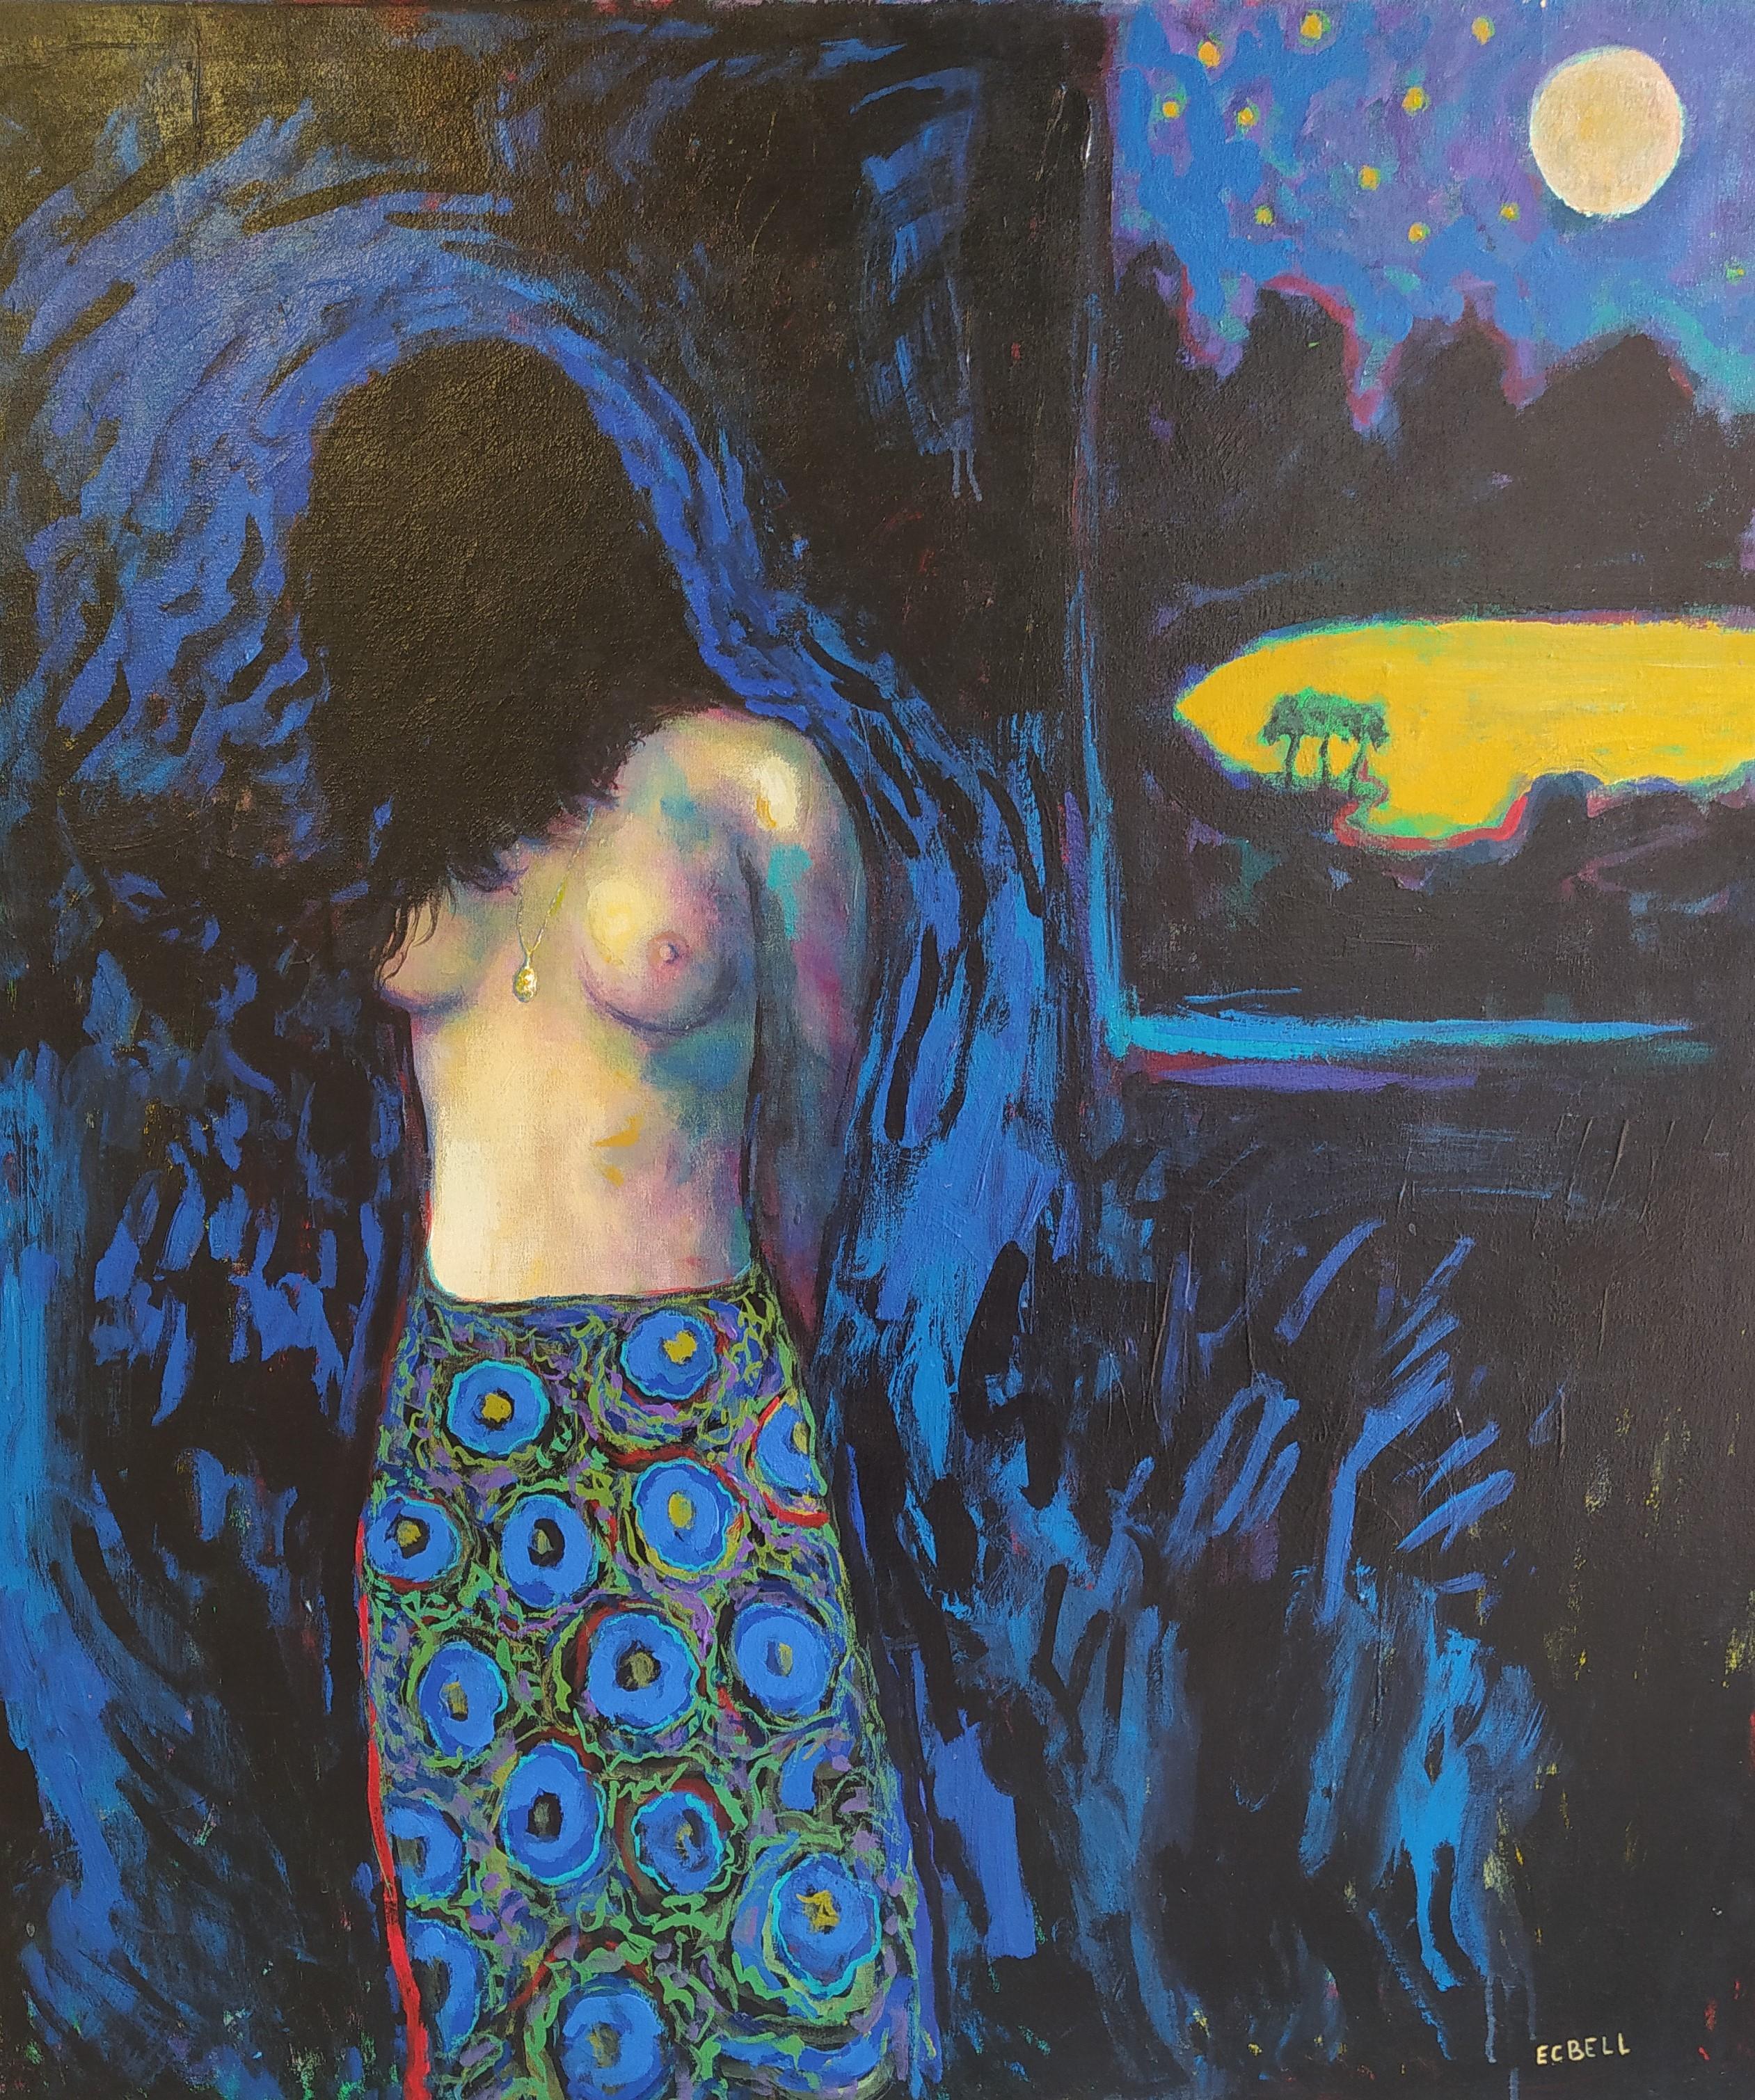 "Silverlake"- Vertical expressionist semi-nude with landscape in blue and black.